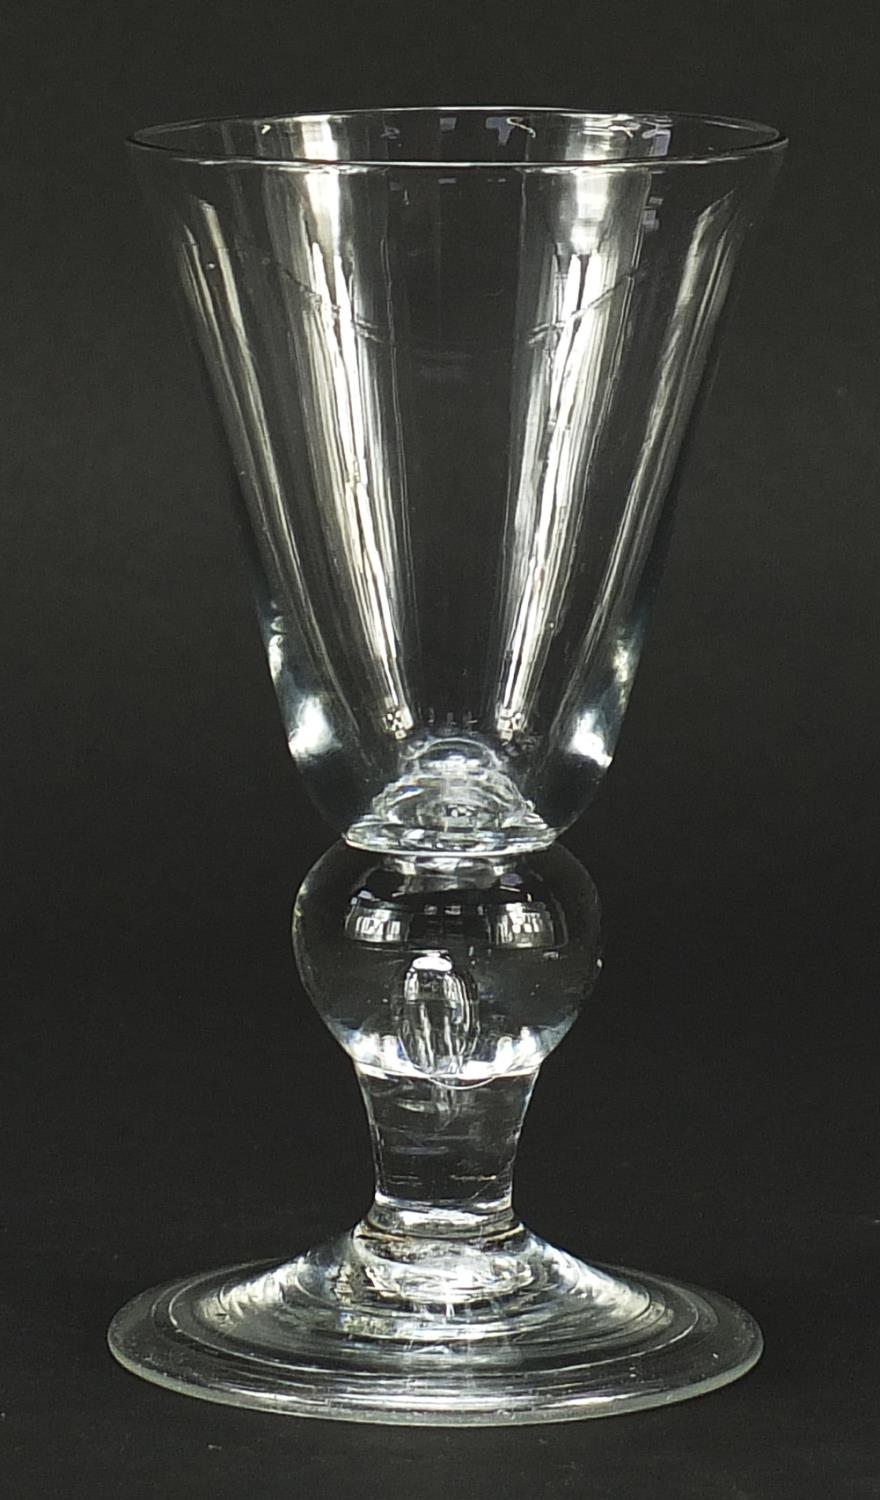 Early 18th century wine glass with folded foot and knopped stem, 12.5cm high - Image 2 of 3